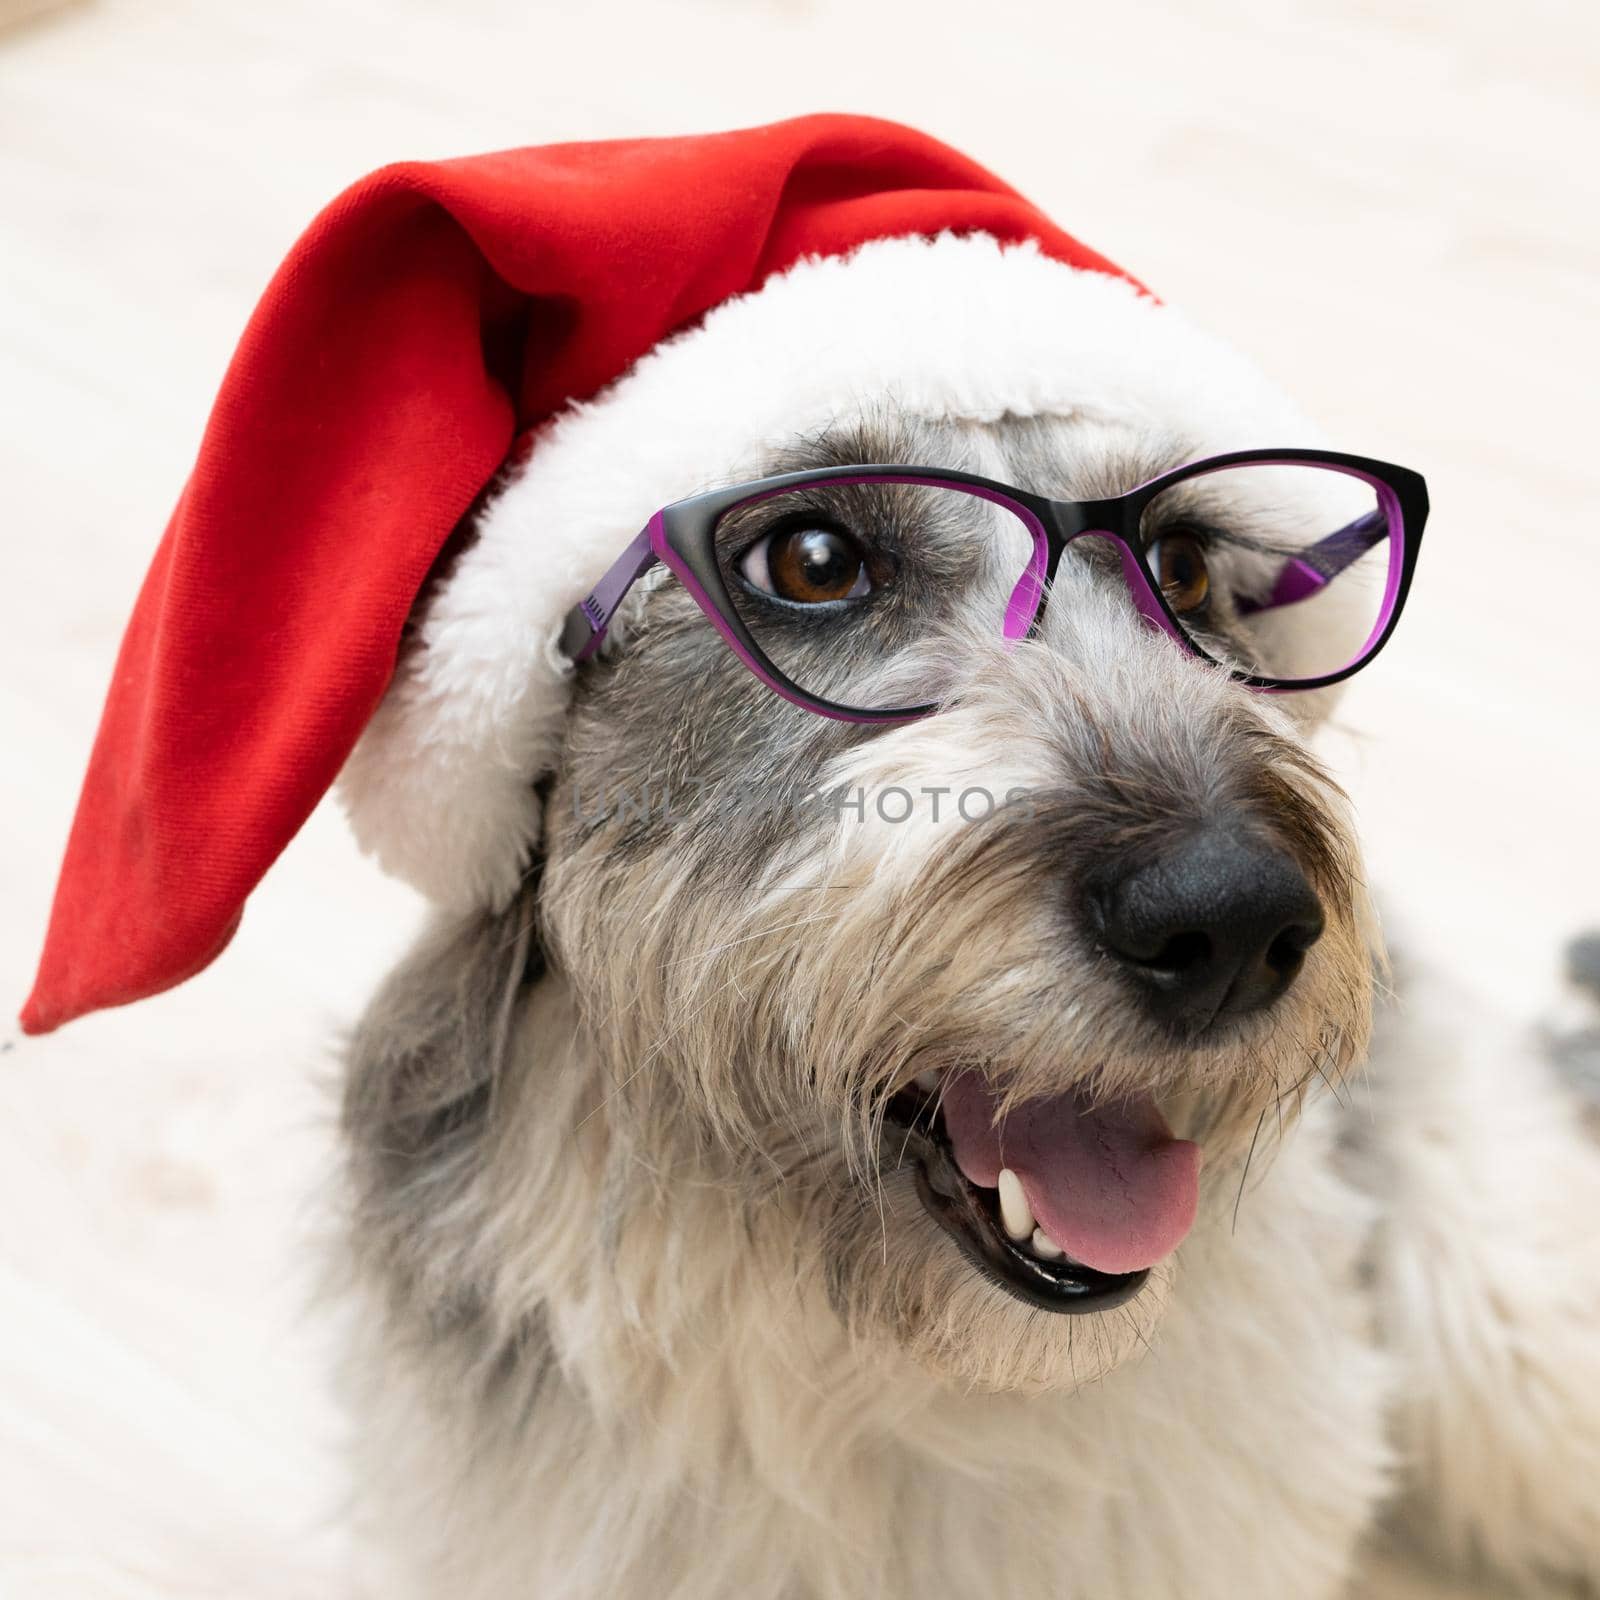 a dog with glasses and a Christmas hat sits with its tongue hanging out by olex